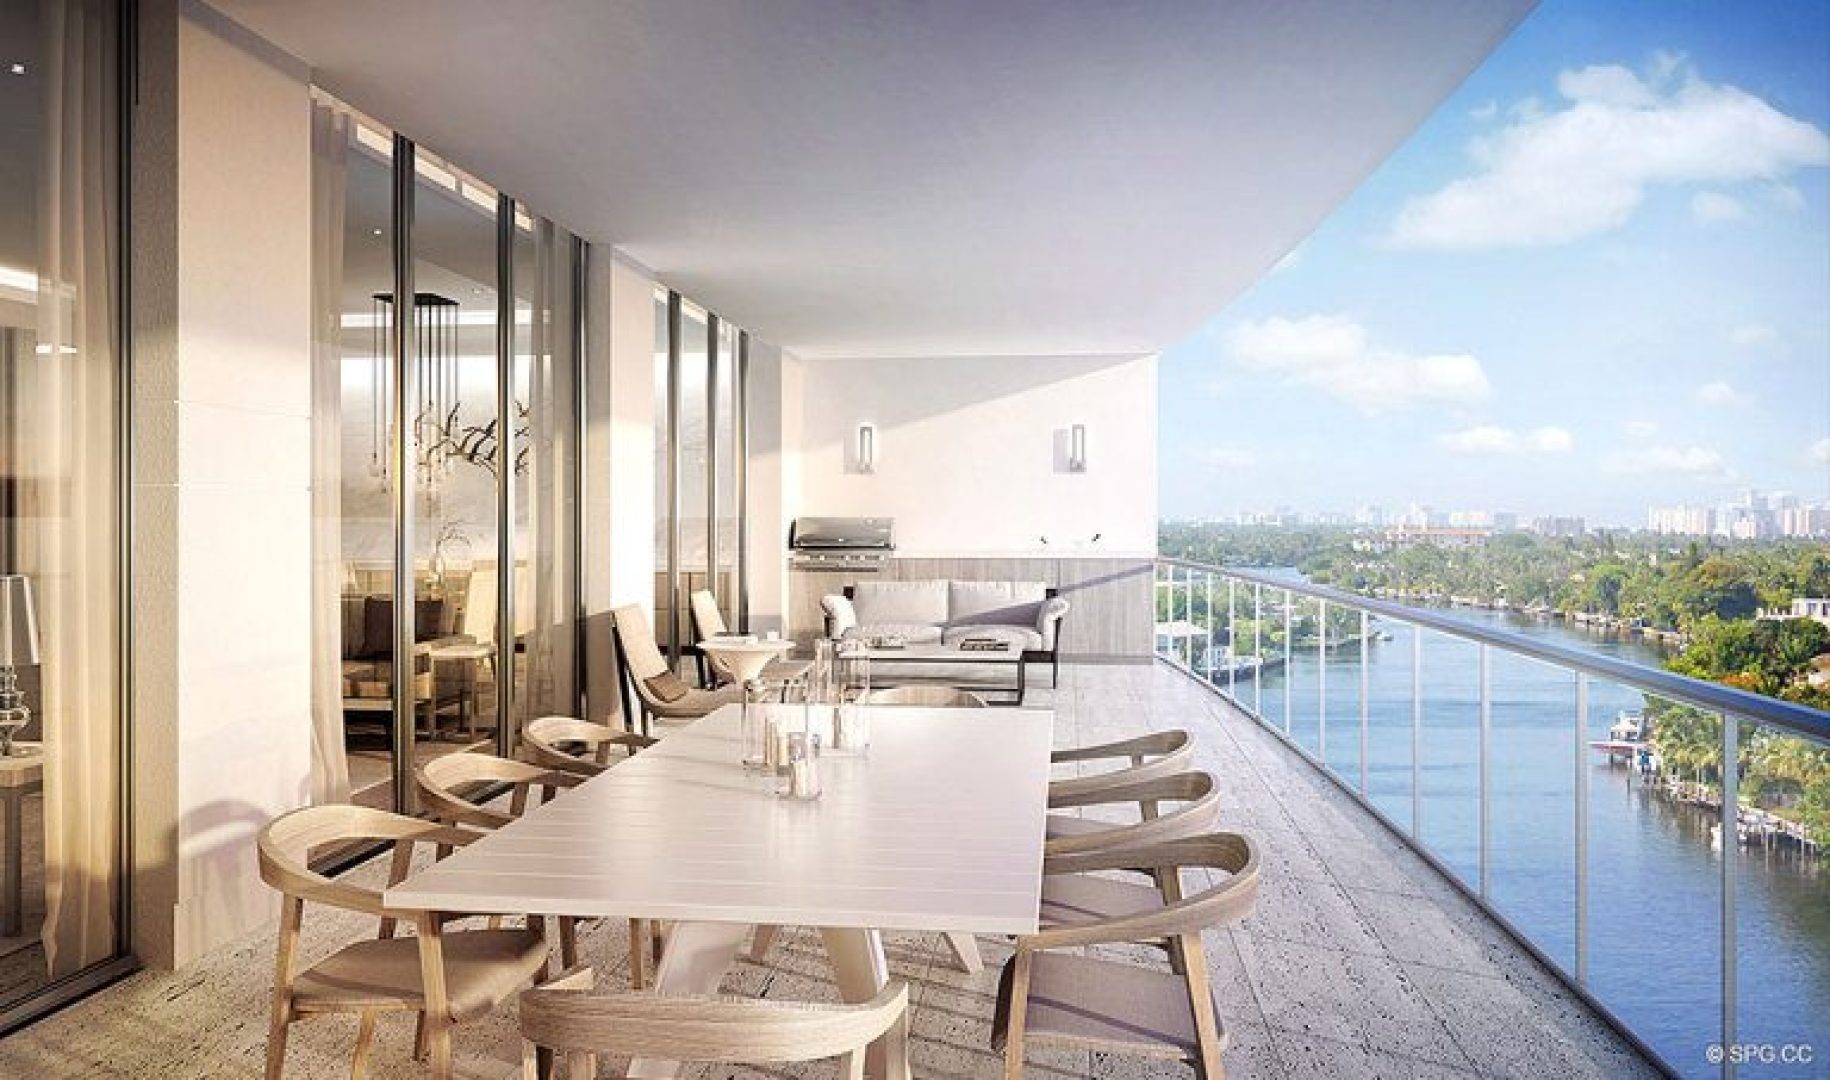 Splendid Intracoastal Terrace Views at Riva, Luxury Waterfront Condos in Fort Lauderdale, Florida 33304.